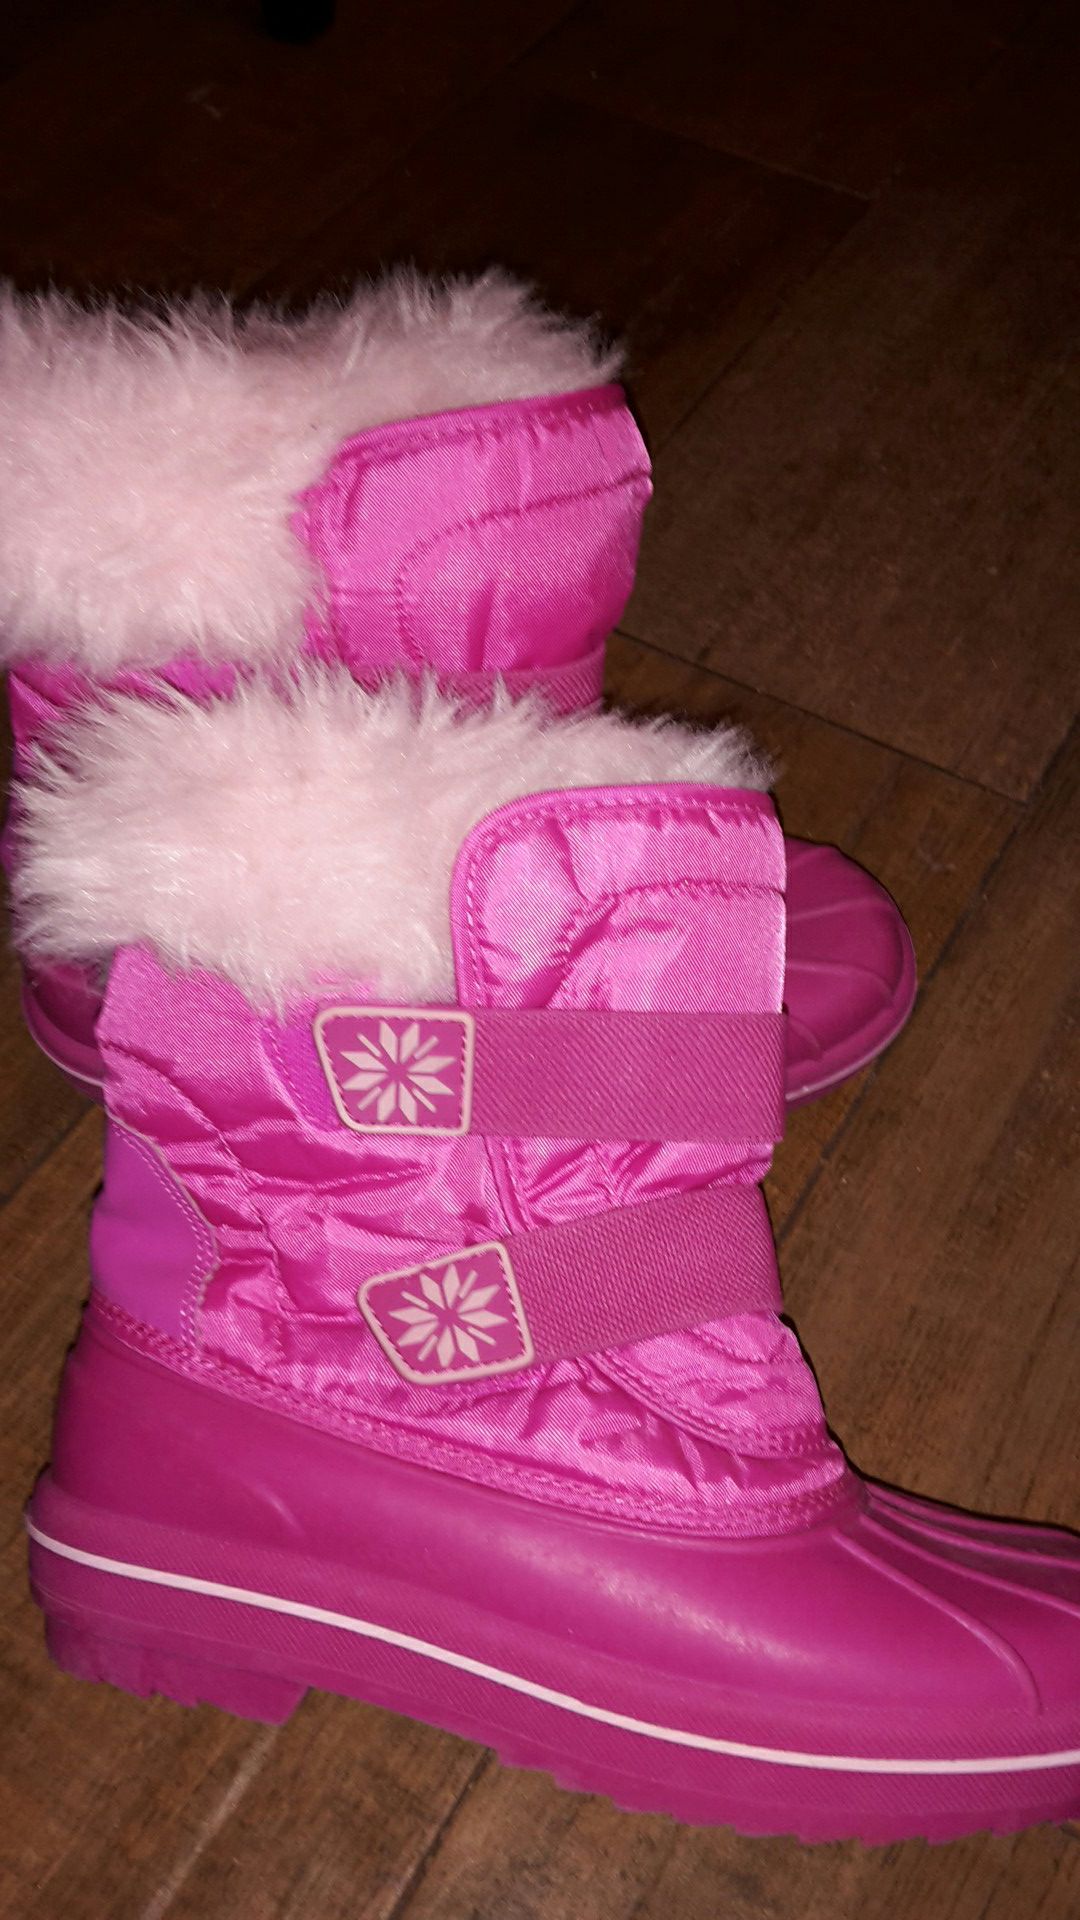 GIRL PINK RAIN BOOTS SIZE 4 almost 10 inches